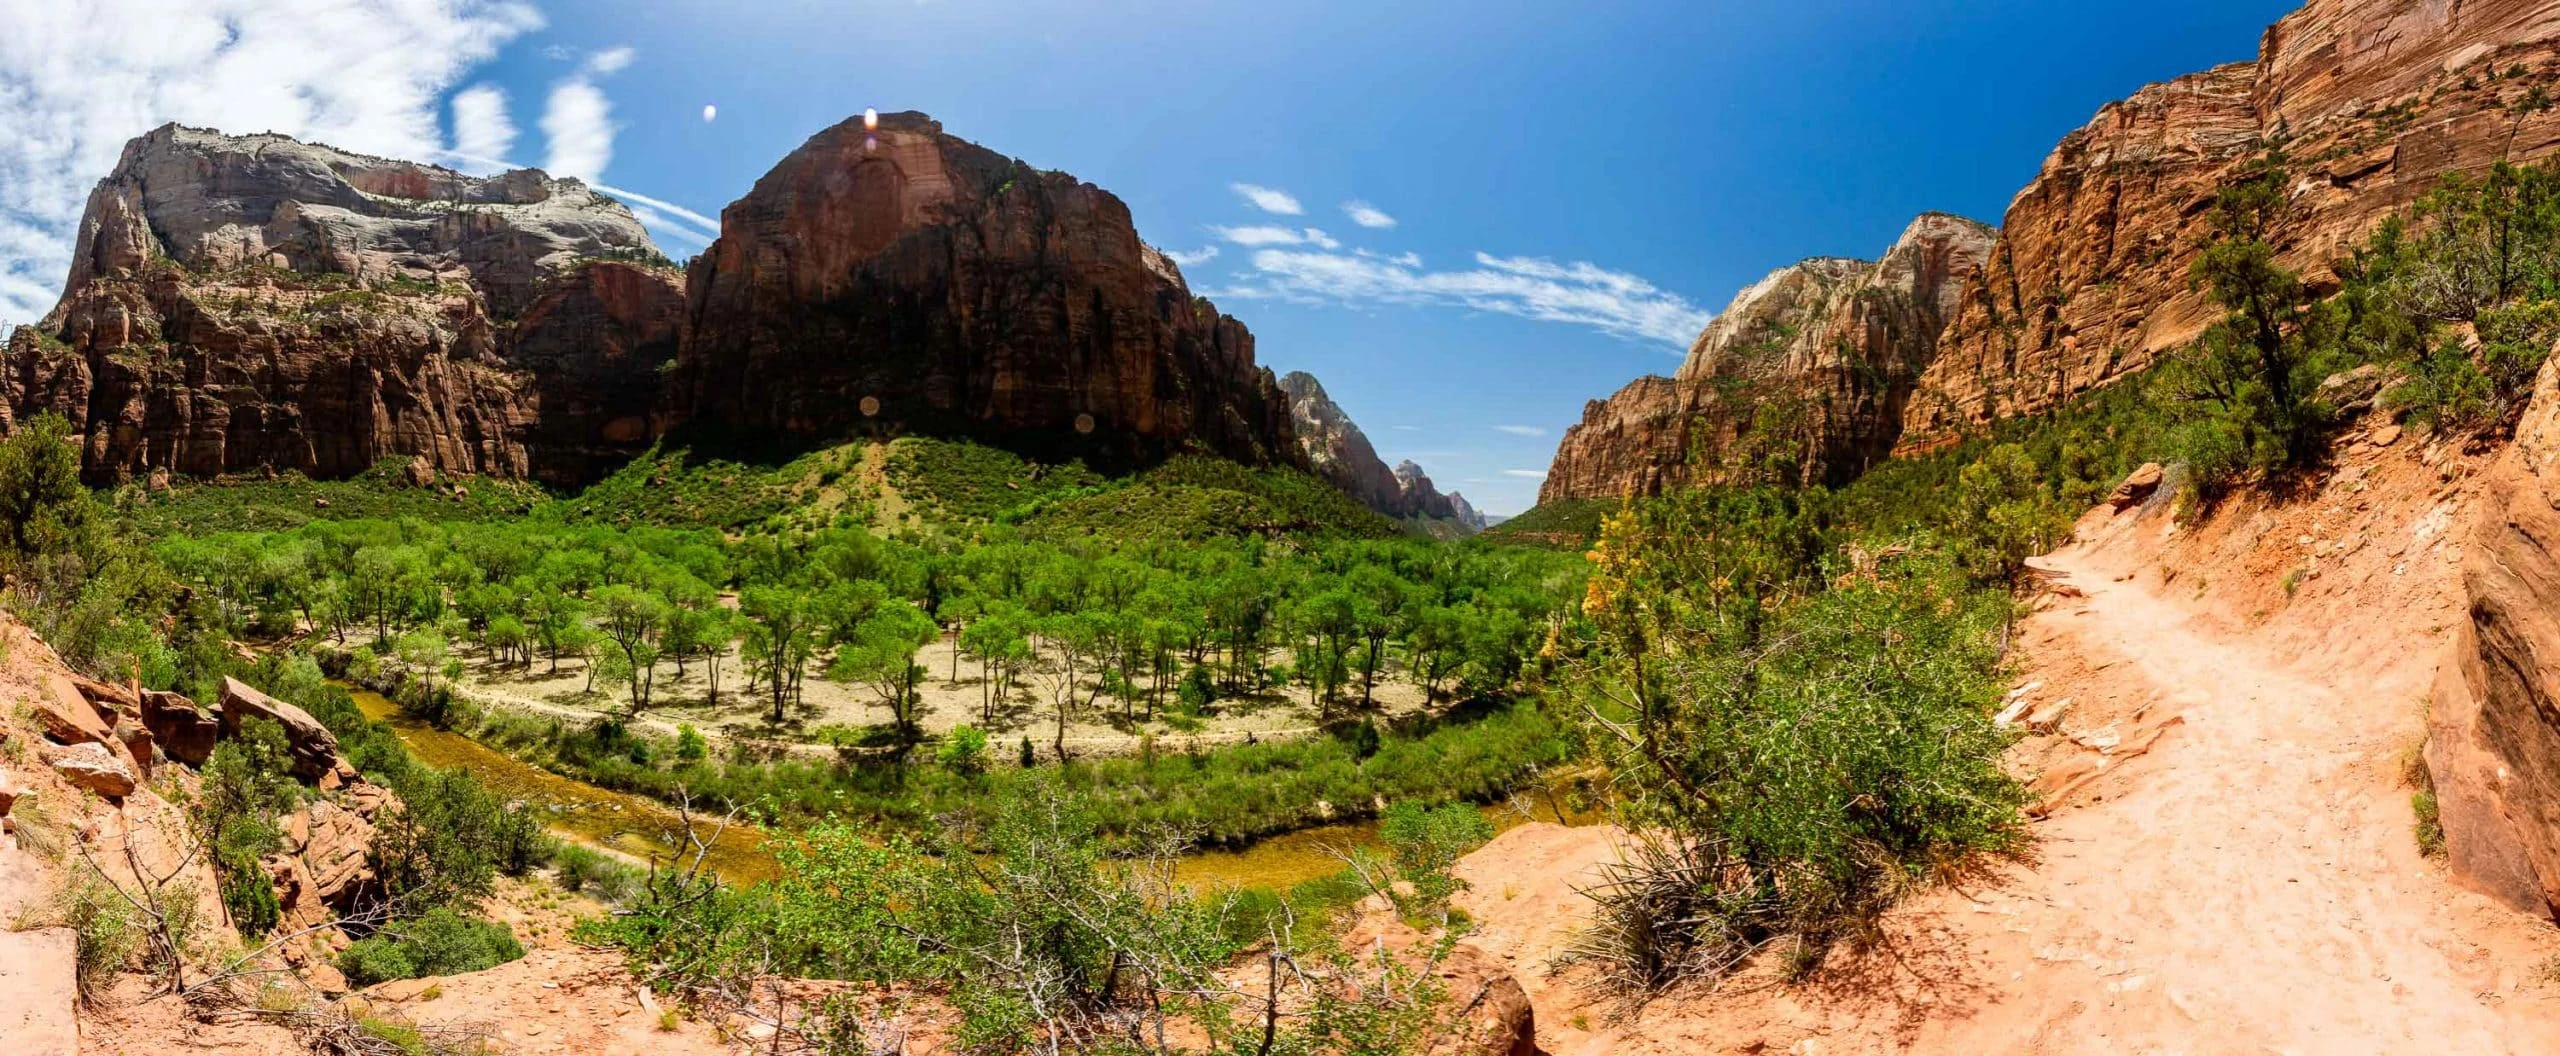 A panorama view of the Emerald pools area at Zion National Park.